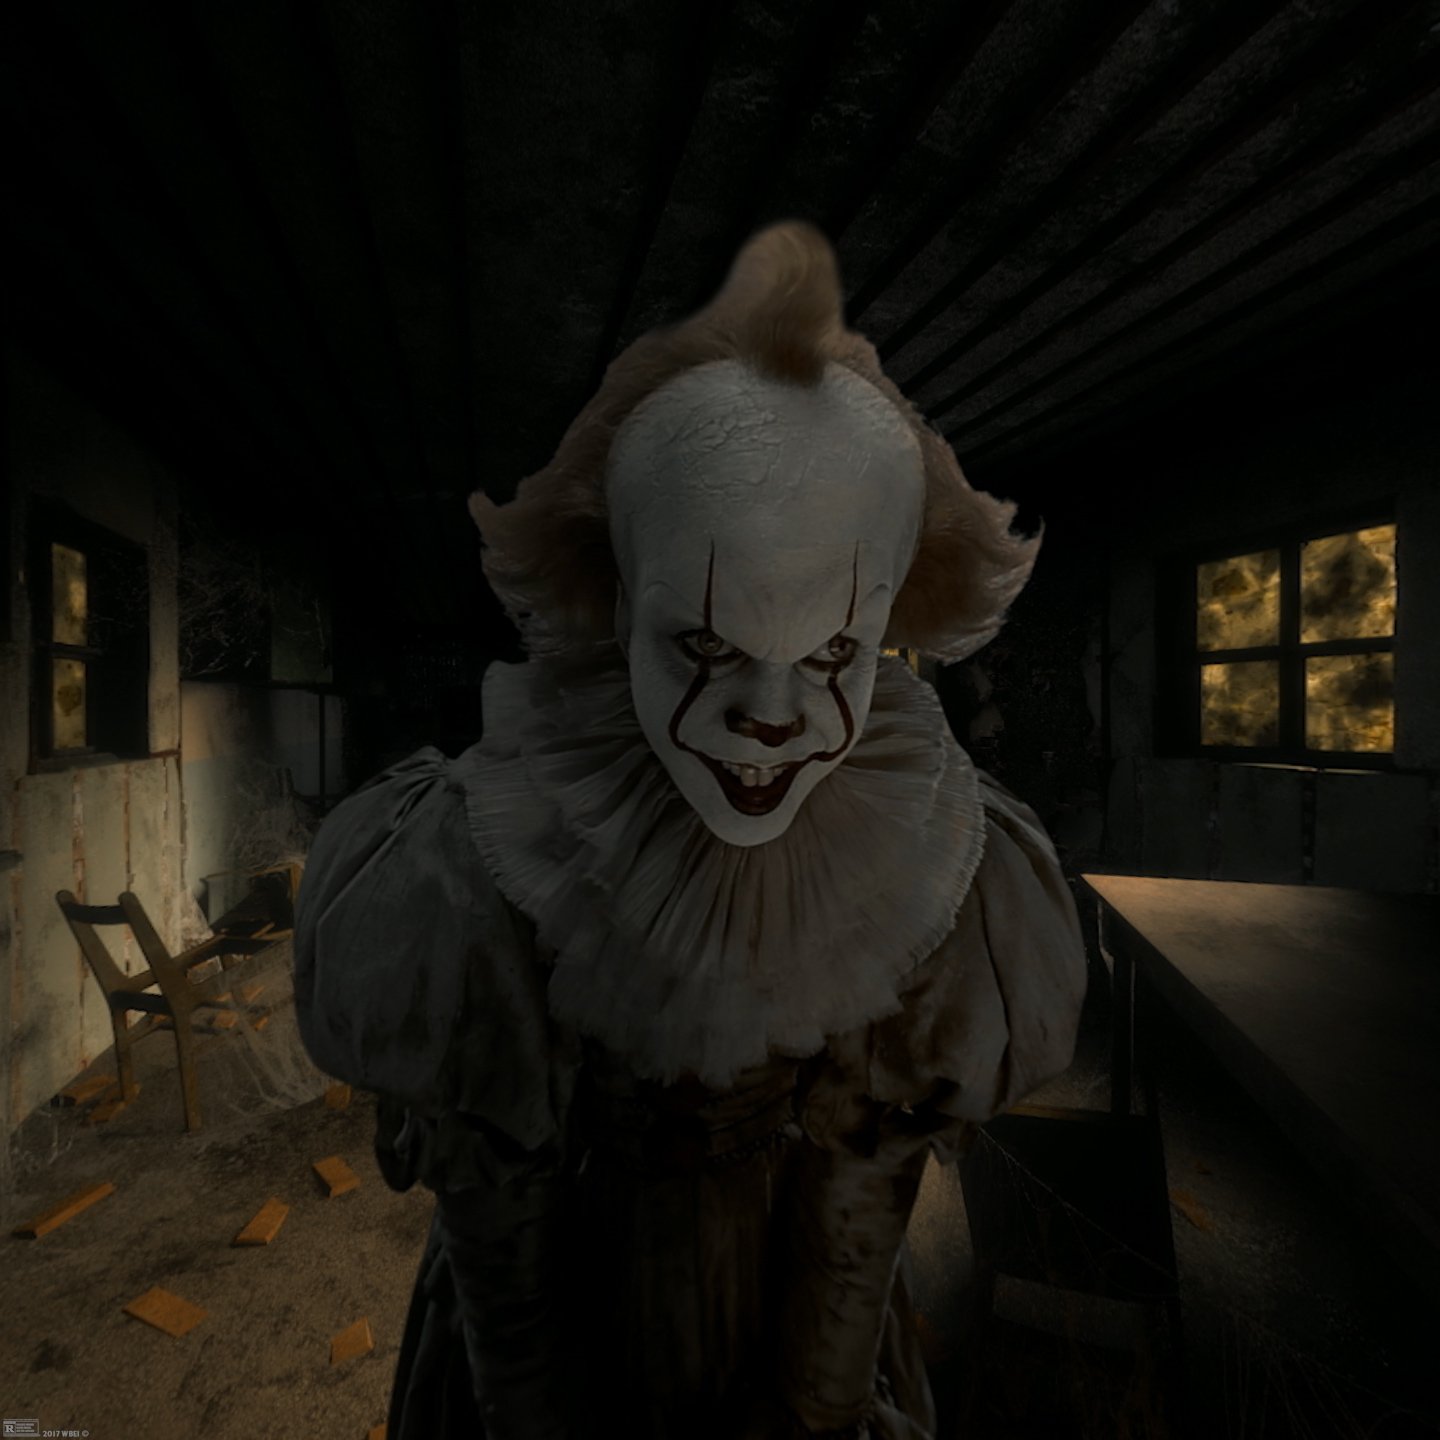 Warner Bros. Entertainment on Twitter: "Go face-to-face with in an all-new terrifying VR #ITMovie https://t.co/mrxYaPe26a https://t.co/cP39oD3tGg" / Twitter